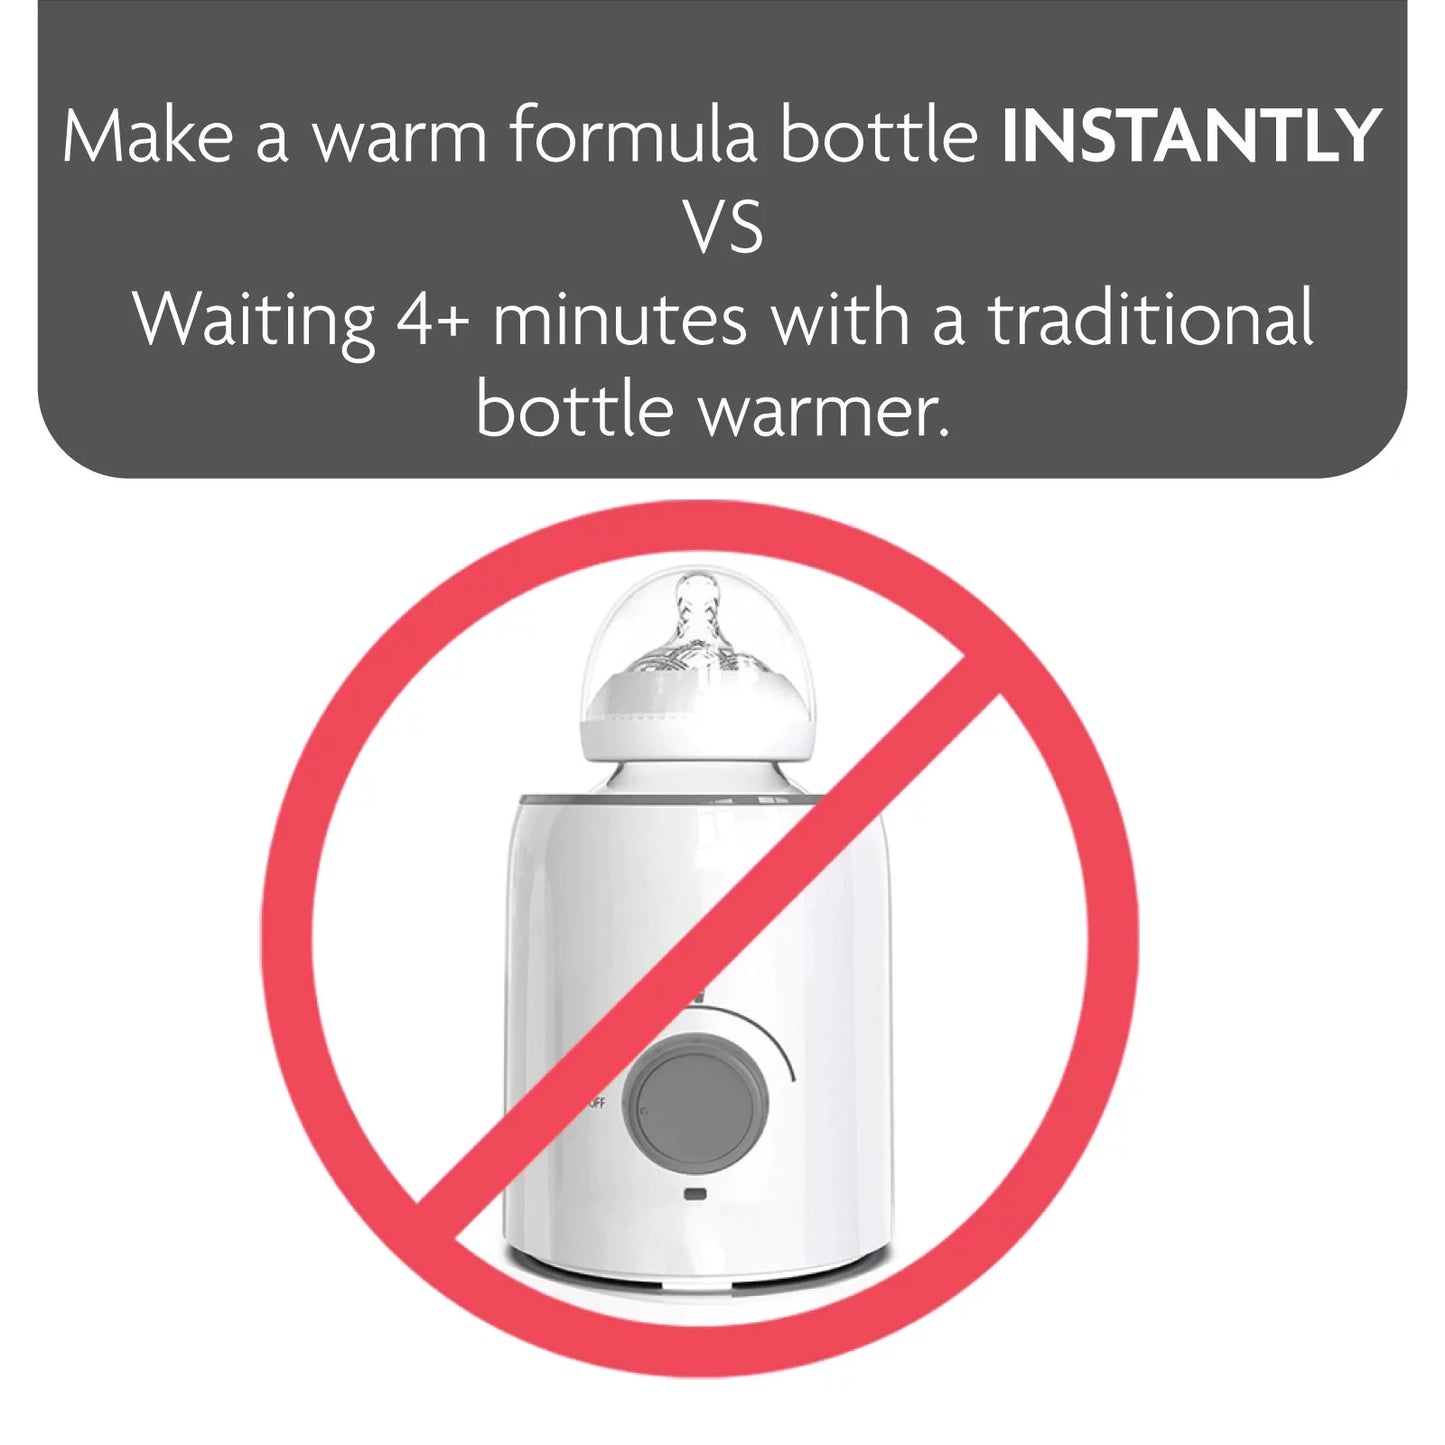 Instant Warmer – Instantly Dispense Warm Water at Perfect Baby Bottle Temperature - Traditional Baby Bottle Warmer Replacement - Fast Baby Formula Bottles 24/7 – 3 Temperatures